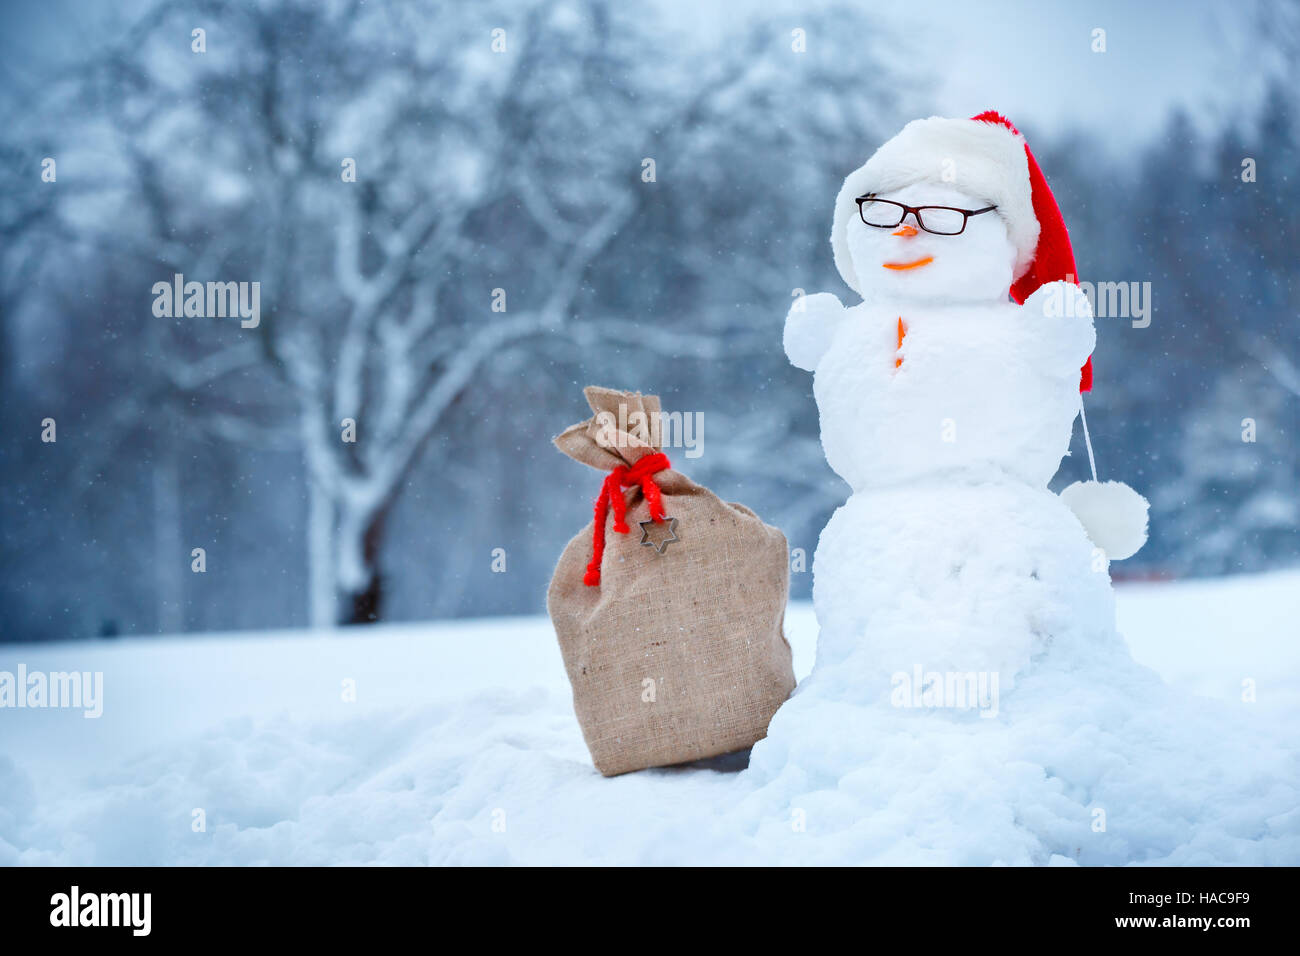 Snowman in Santa hat and sackcloth bag on winter day Stock Photo